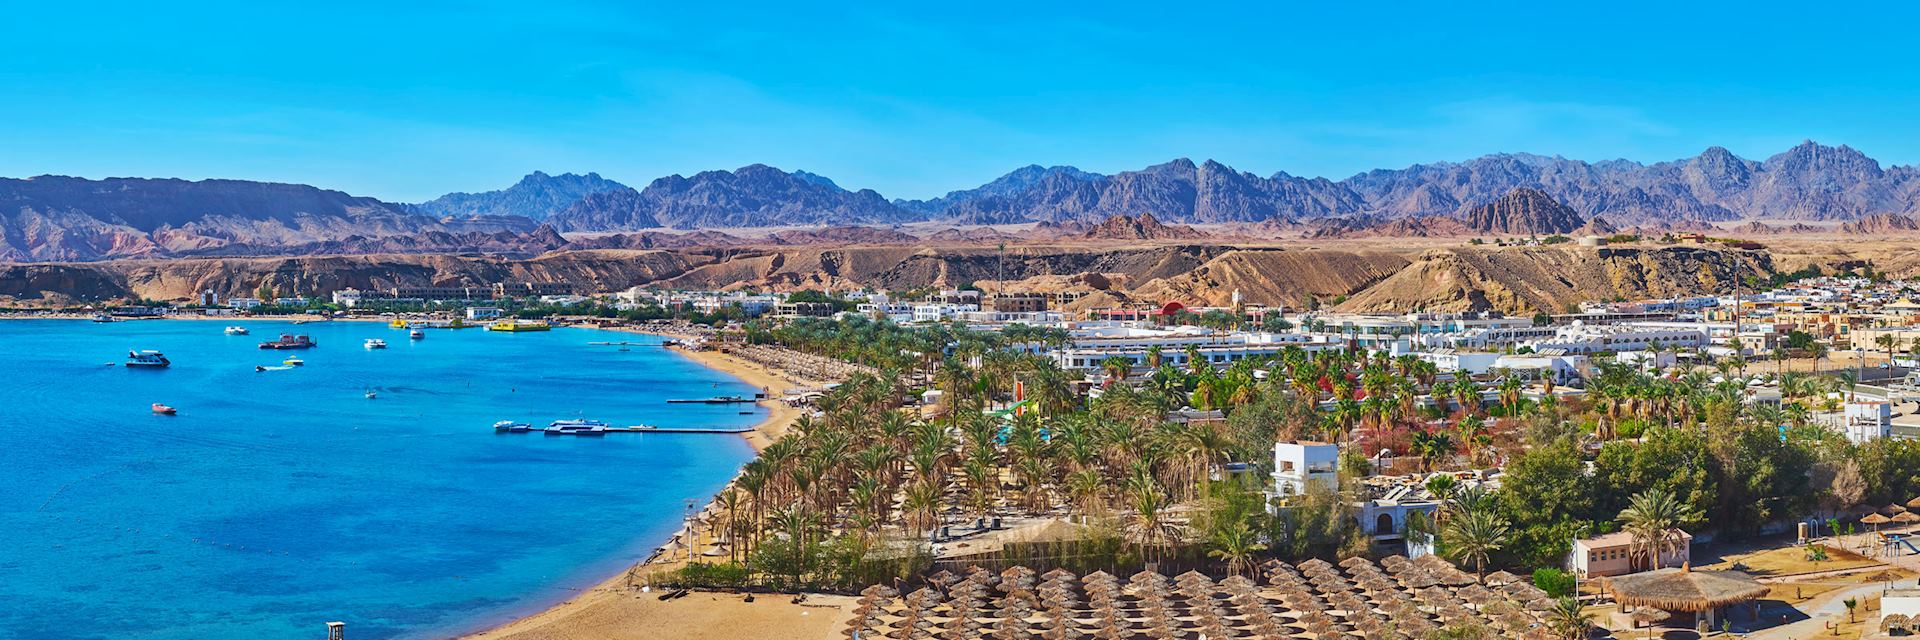 Visit Red Sea, Egypt | Vacations | Audley Travel